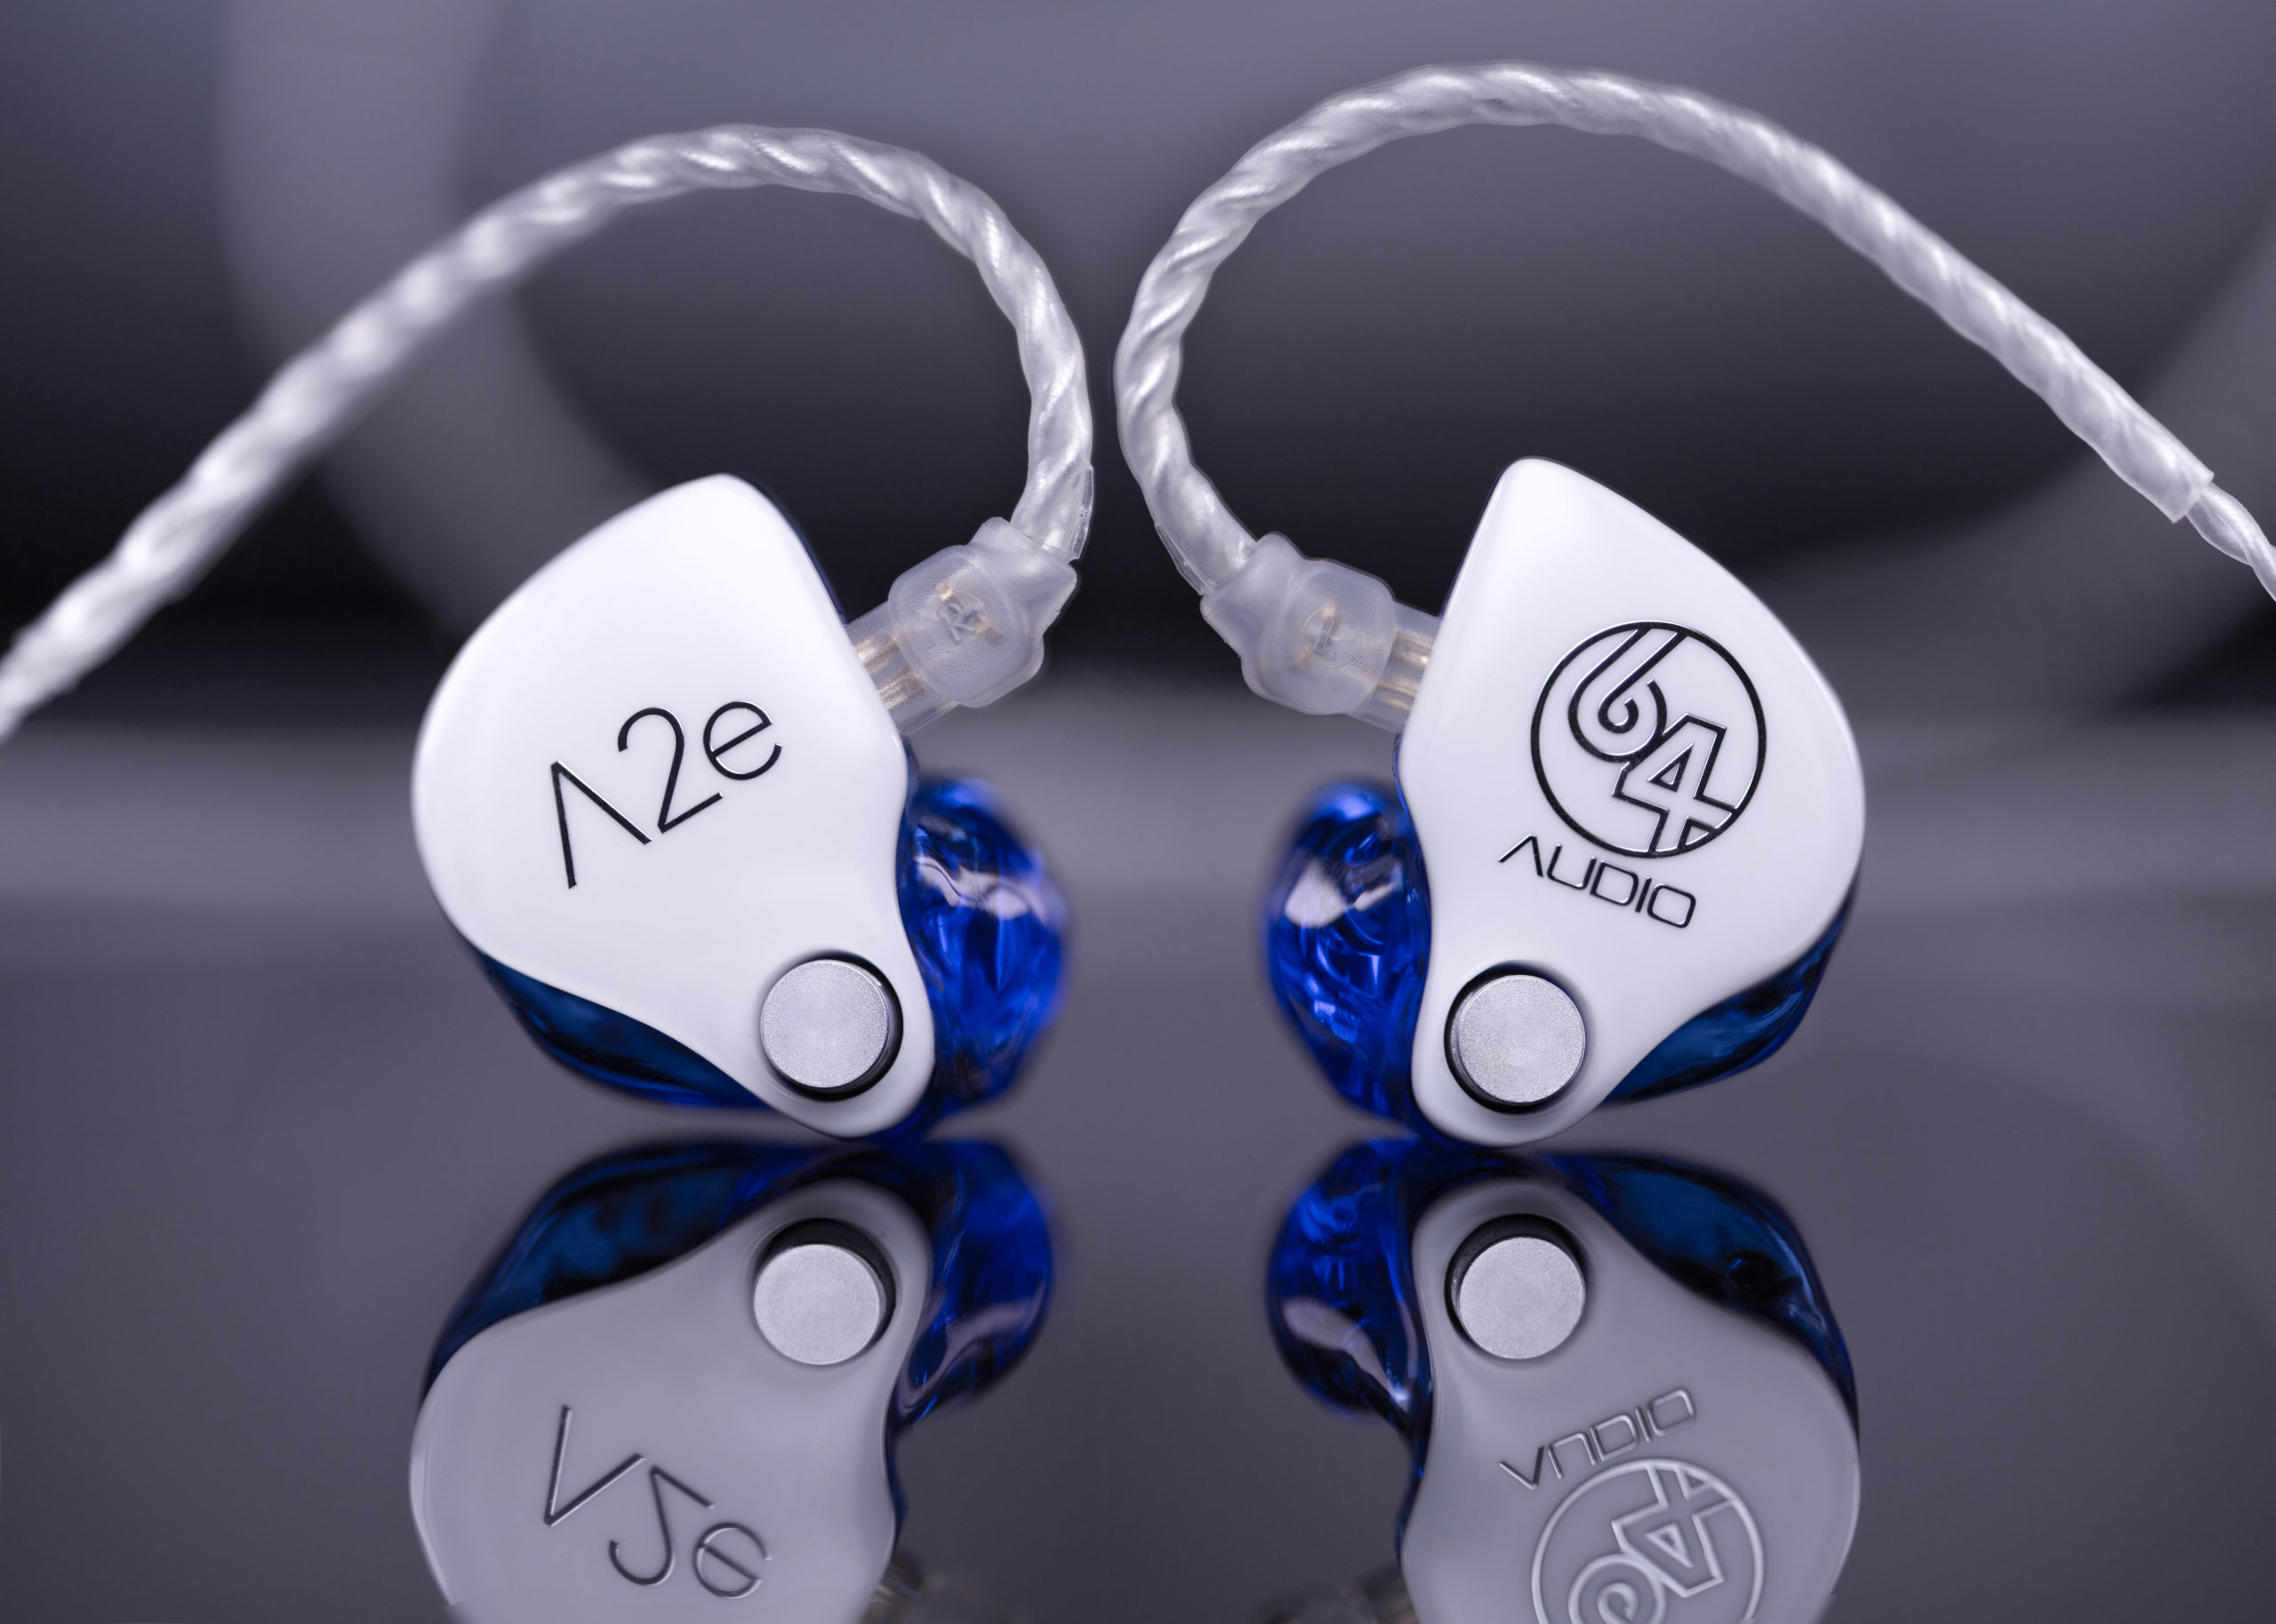 64 Audio Updates Famed A2e Custom In-Ear Monitor with LID™ Technology